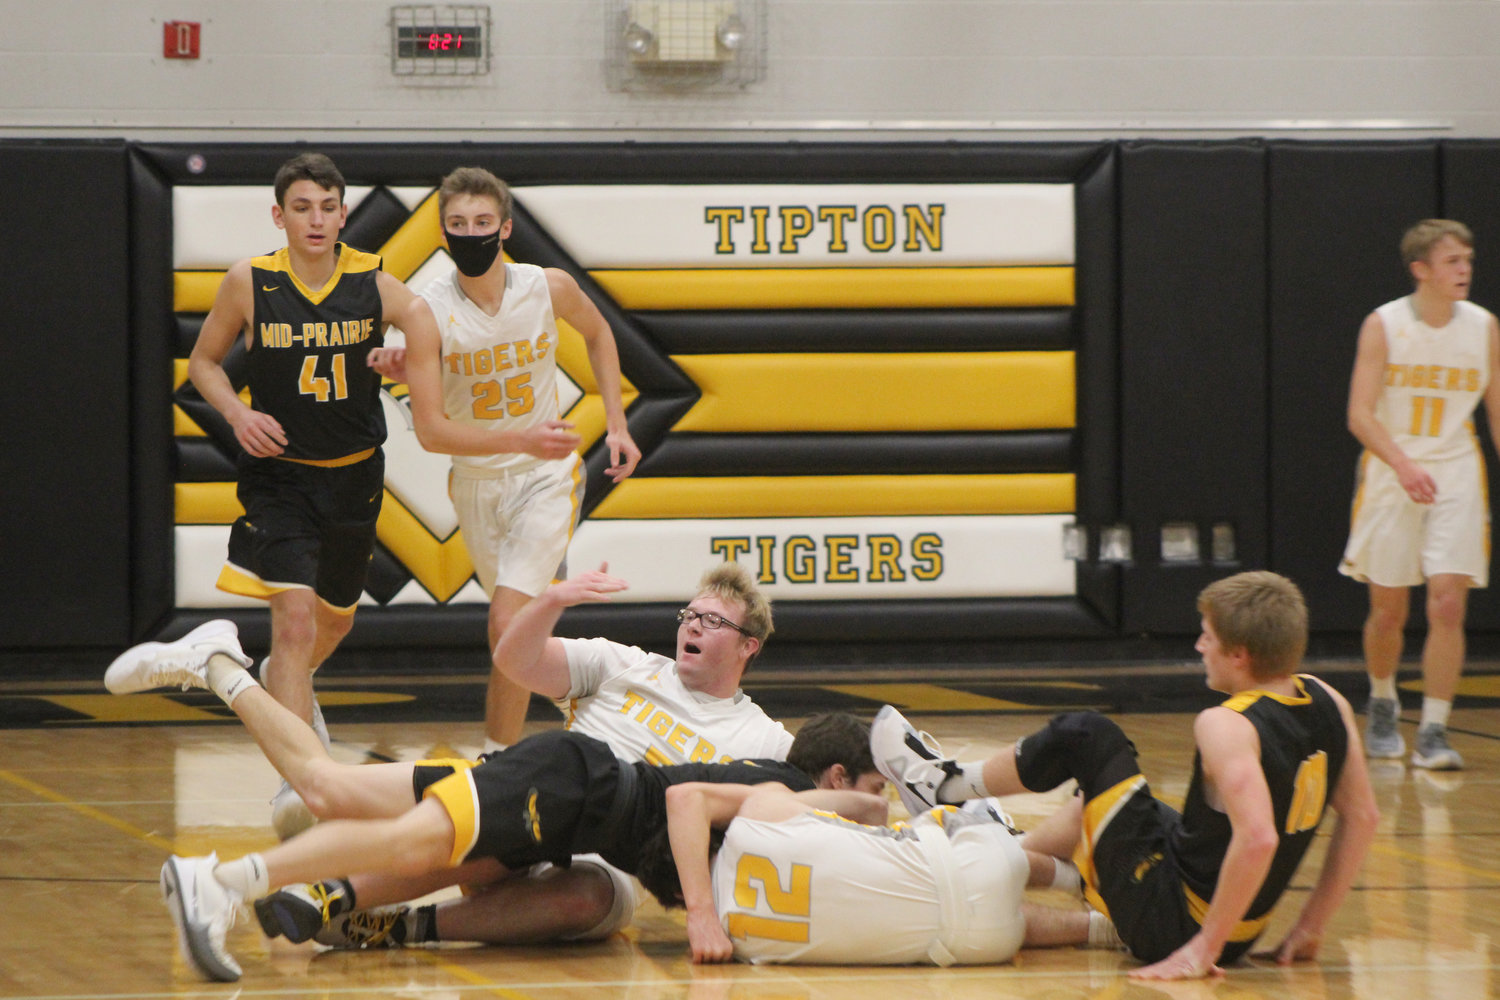 Mid-Prairie’s Will Cavanagh dives into a pile with teammate Alex Bean, right, during a chase for the basketball during last Friday’s River Valley Conference game against Tipton. The Golden Hawks shut out the Tigers for nearly the entire first quarter and won, 52-25.